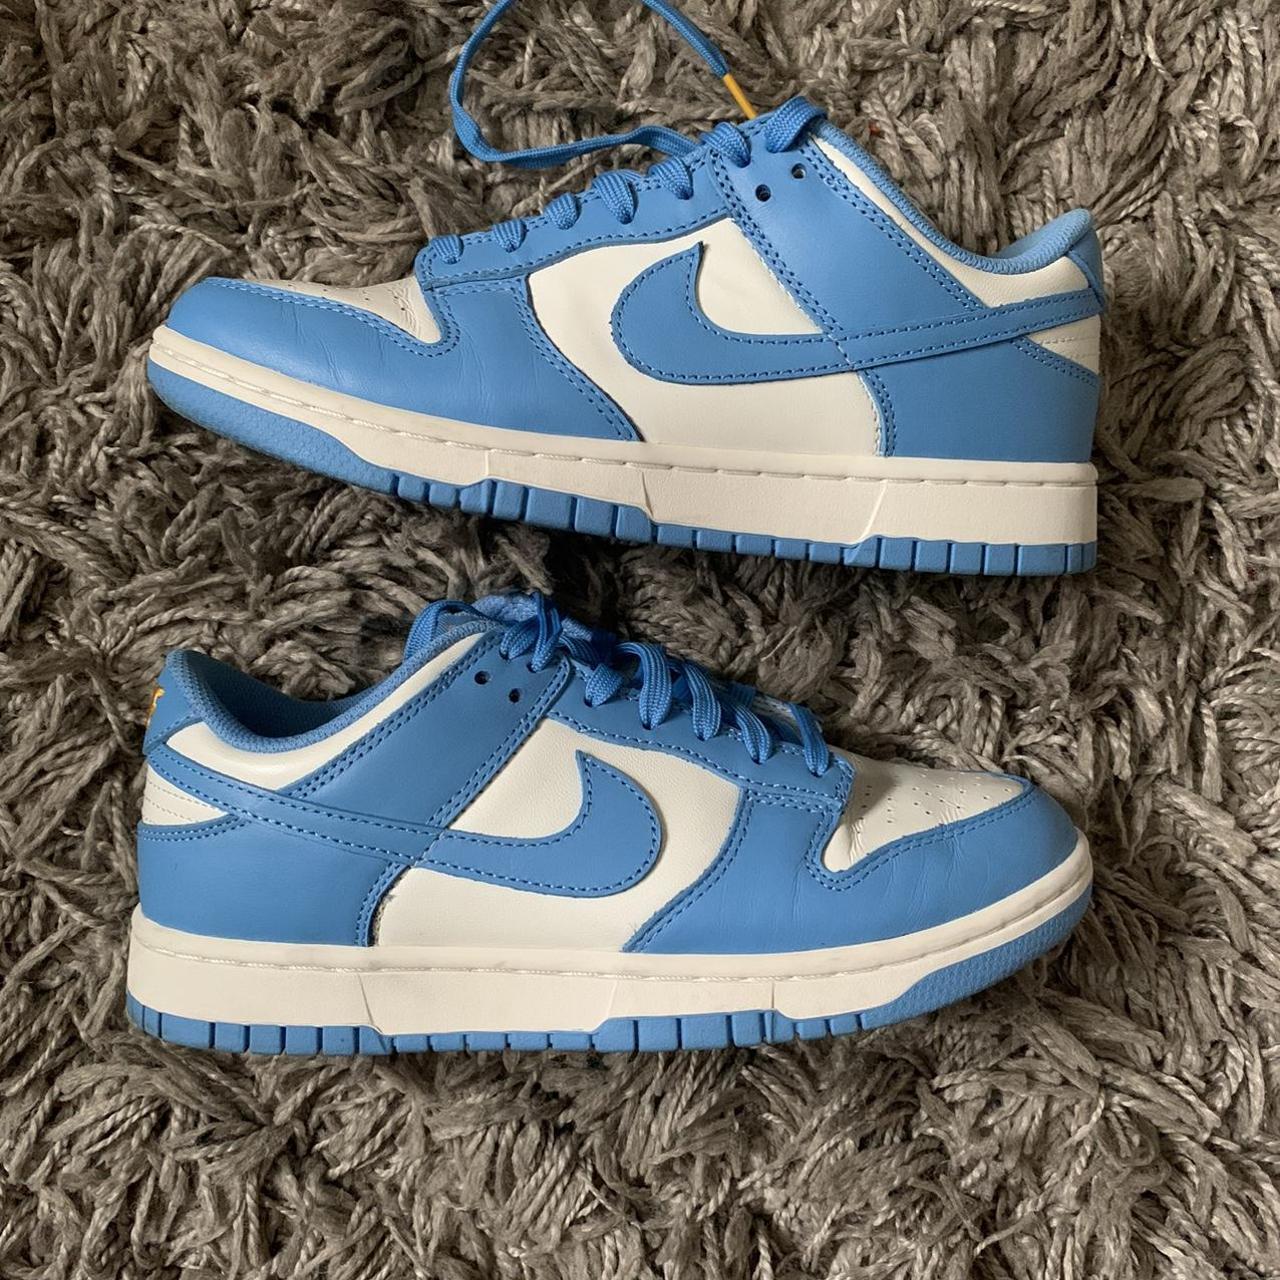 Nike Dunk Low Coast Uk Size 6 Reduced price due to... - Depop